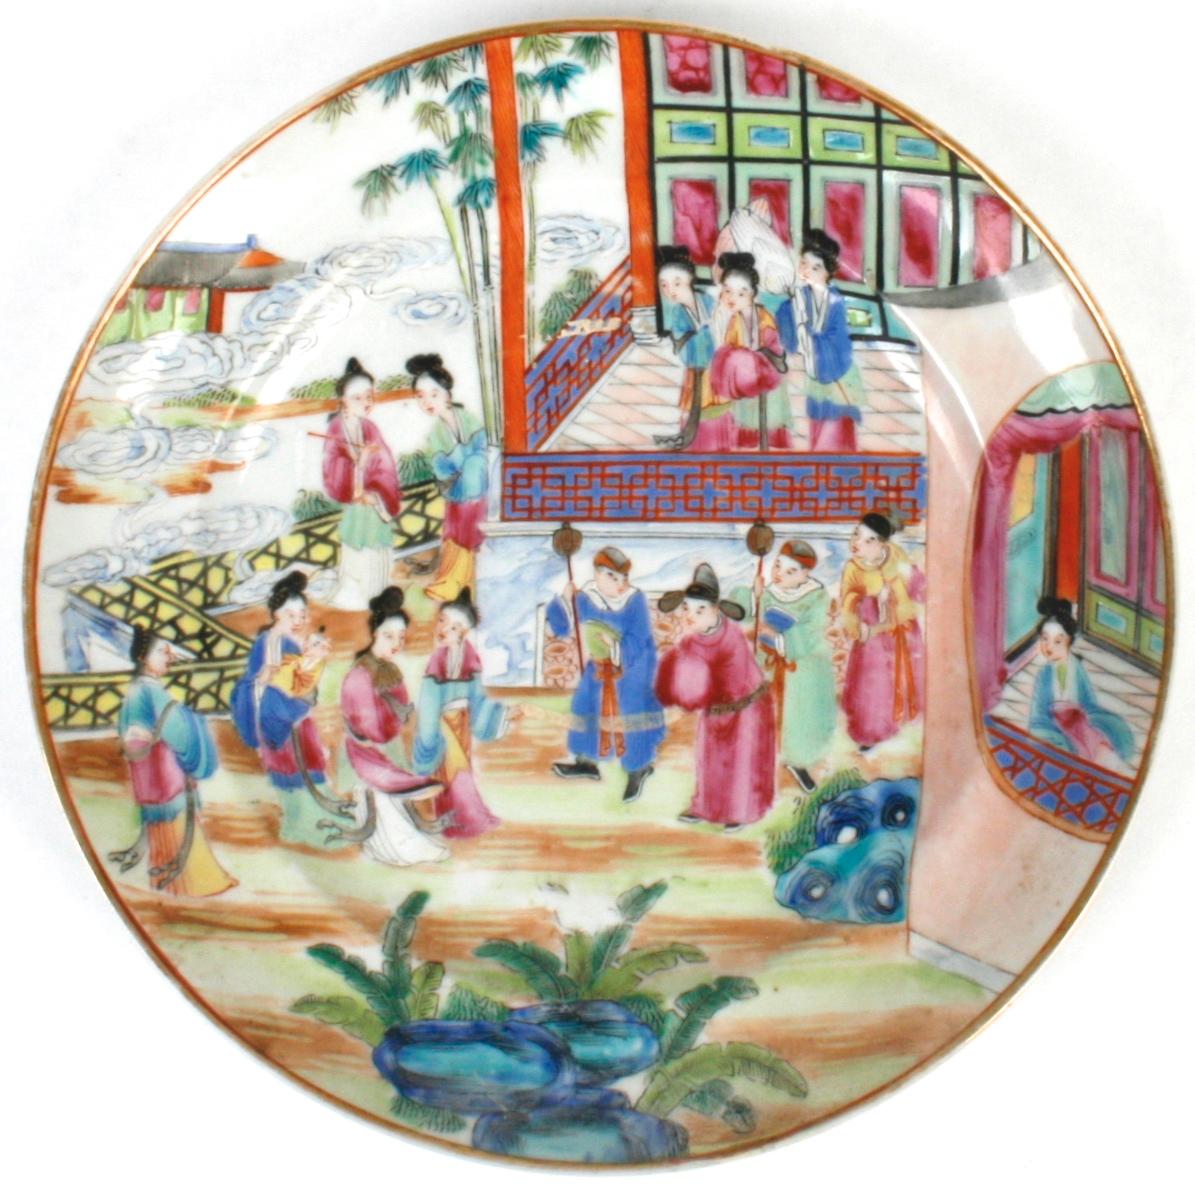 A set of three Chinese export rose Mandarin cabinet plates from the late 18th century. The pieces display three varied traditional scenes emphasizing figures in architectural garden settings. Two of the plates have floral boarders with Chinese